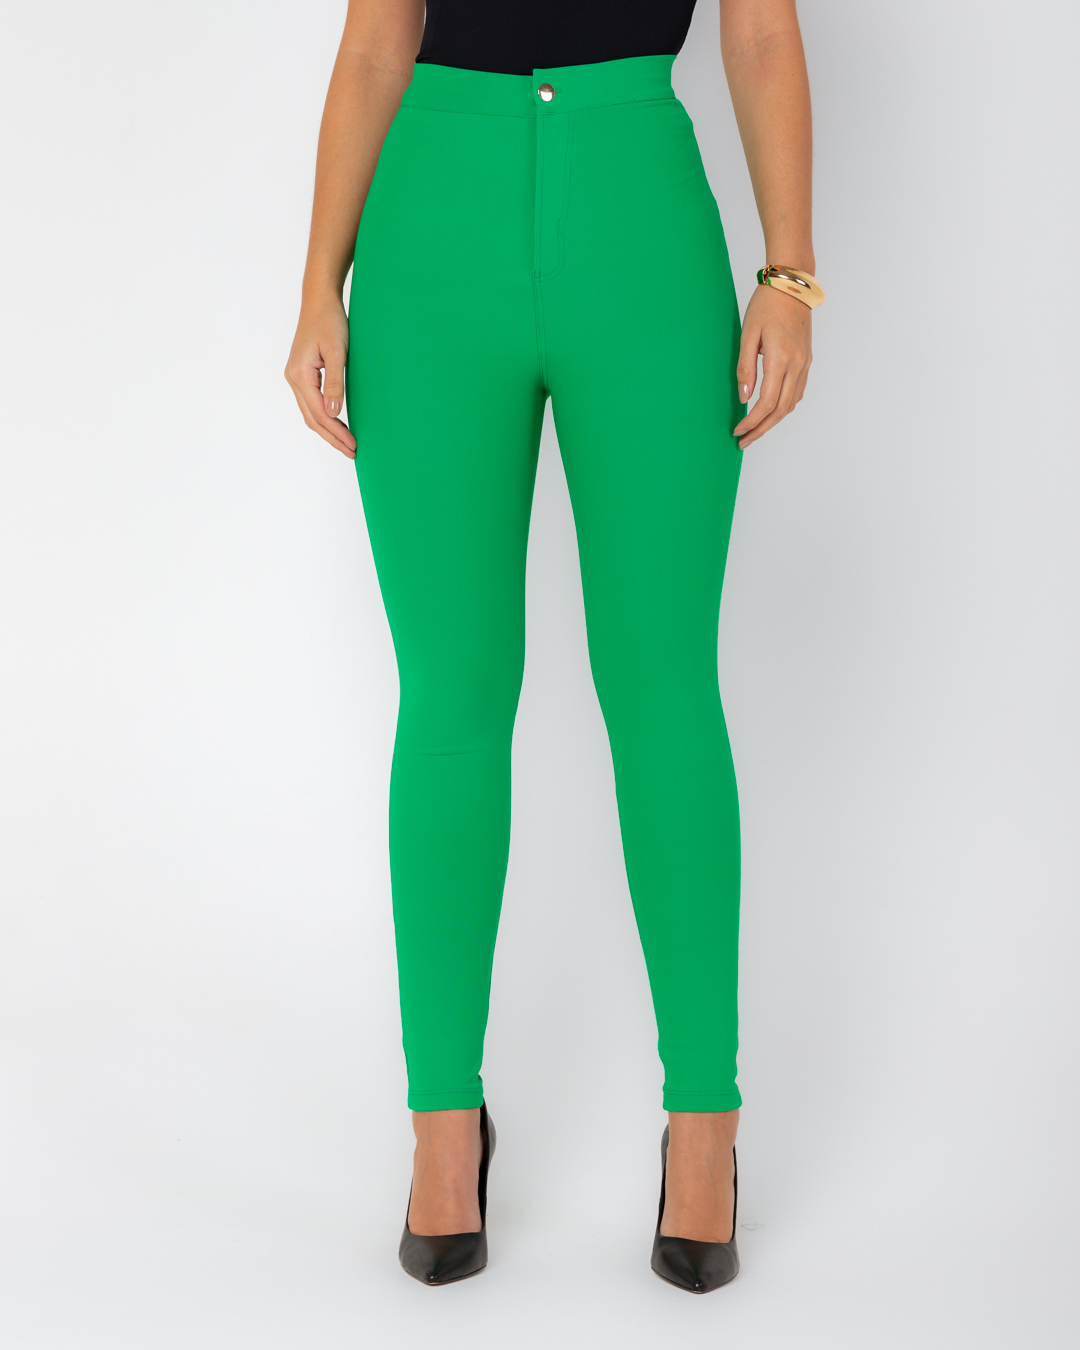 Miss Misses - Miss Misses Skinny Pants With Green Pocket - 18855023